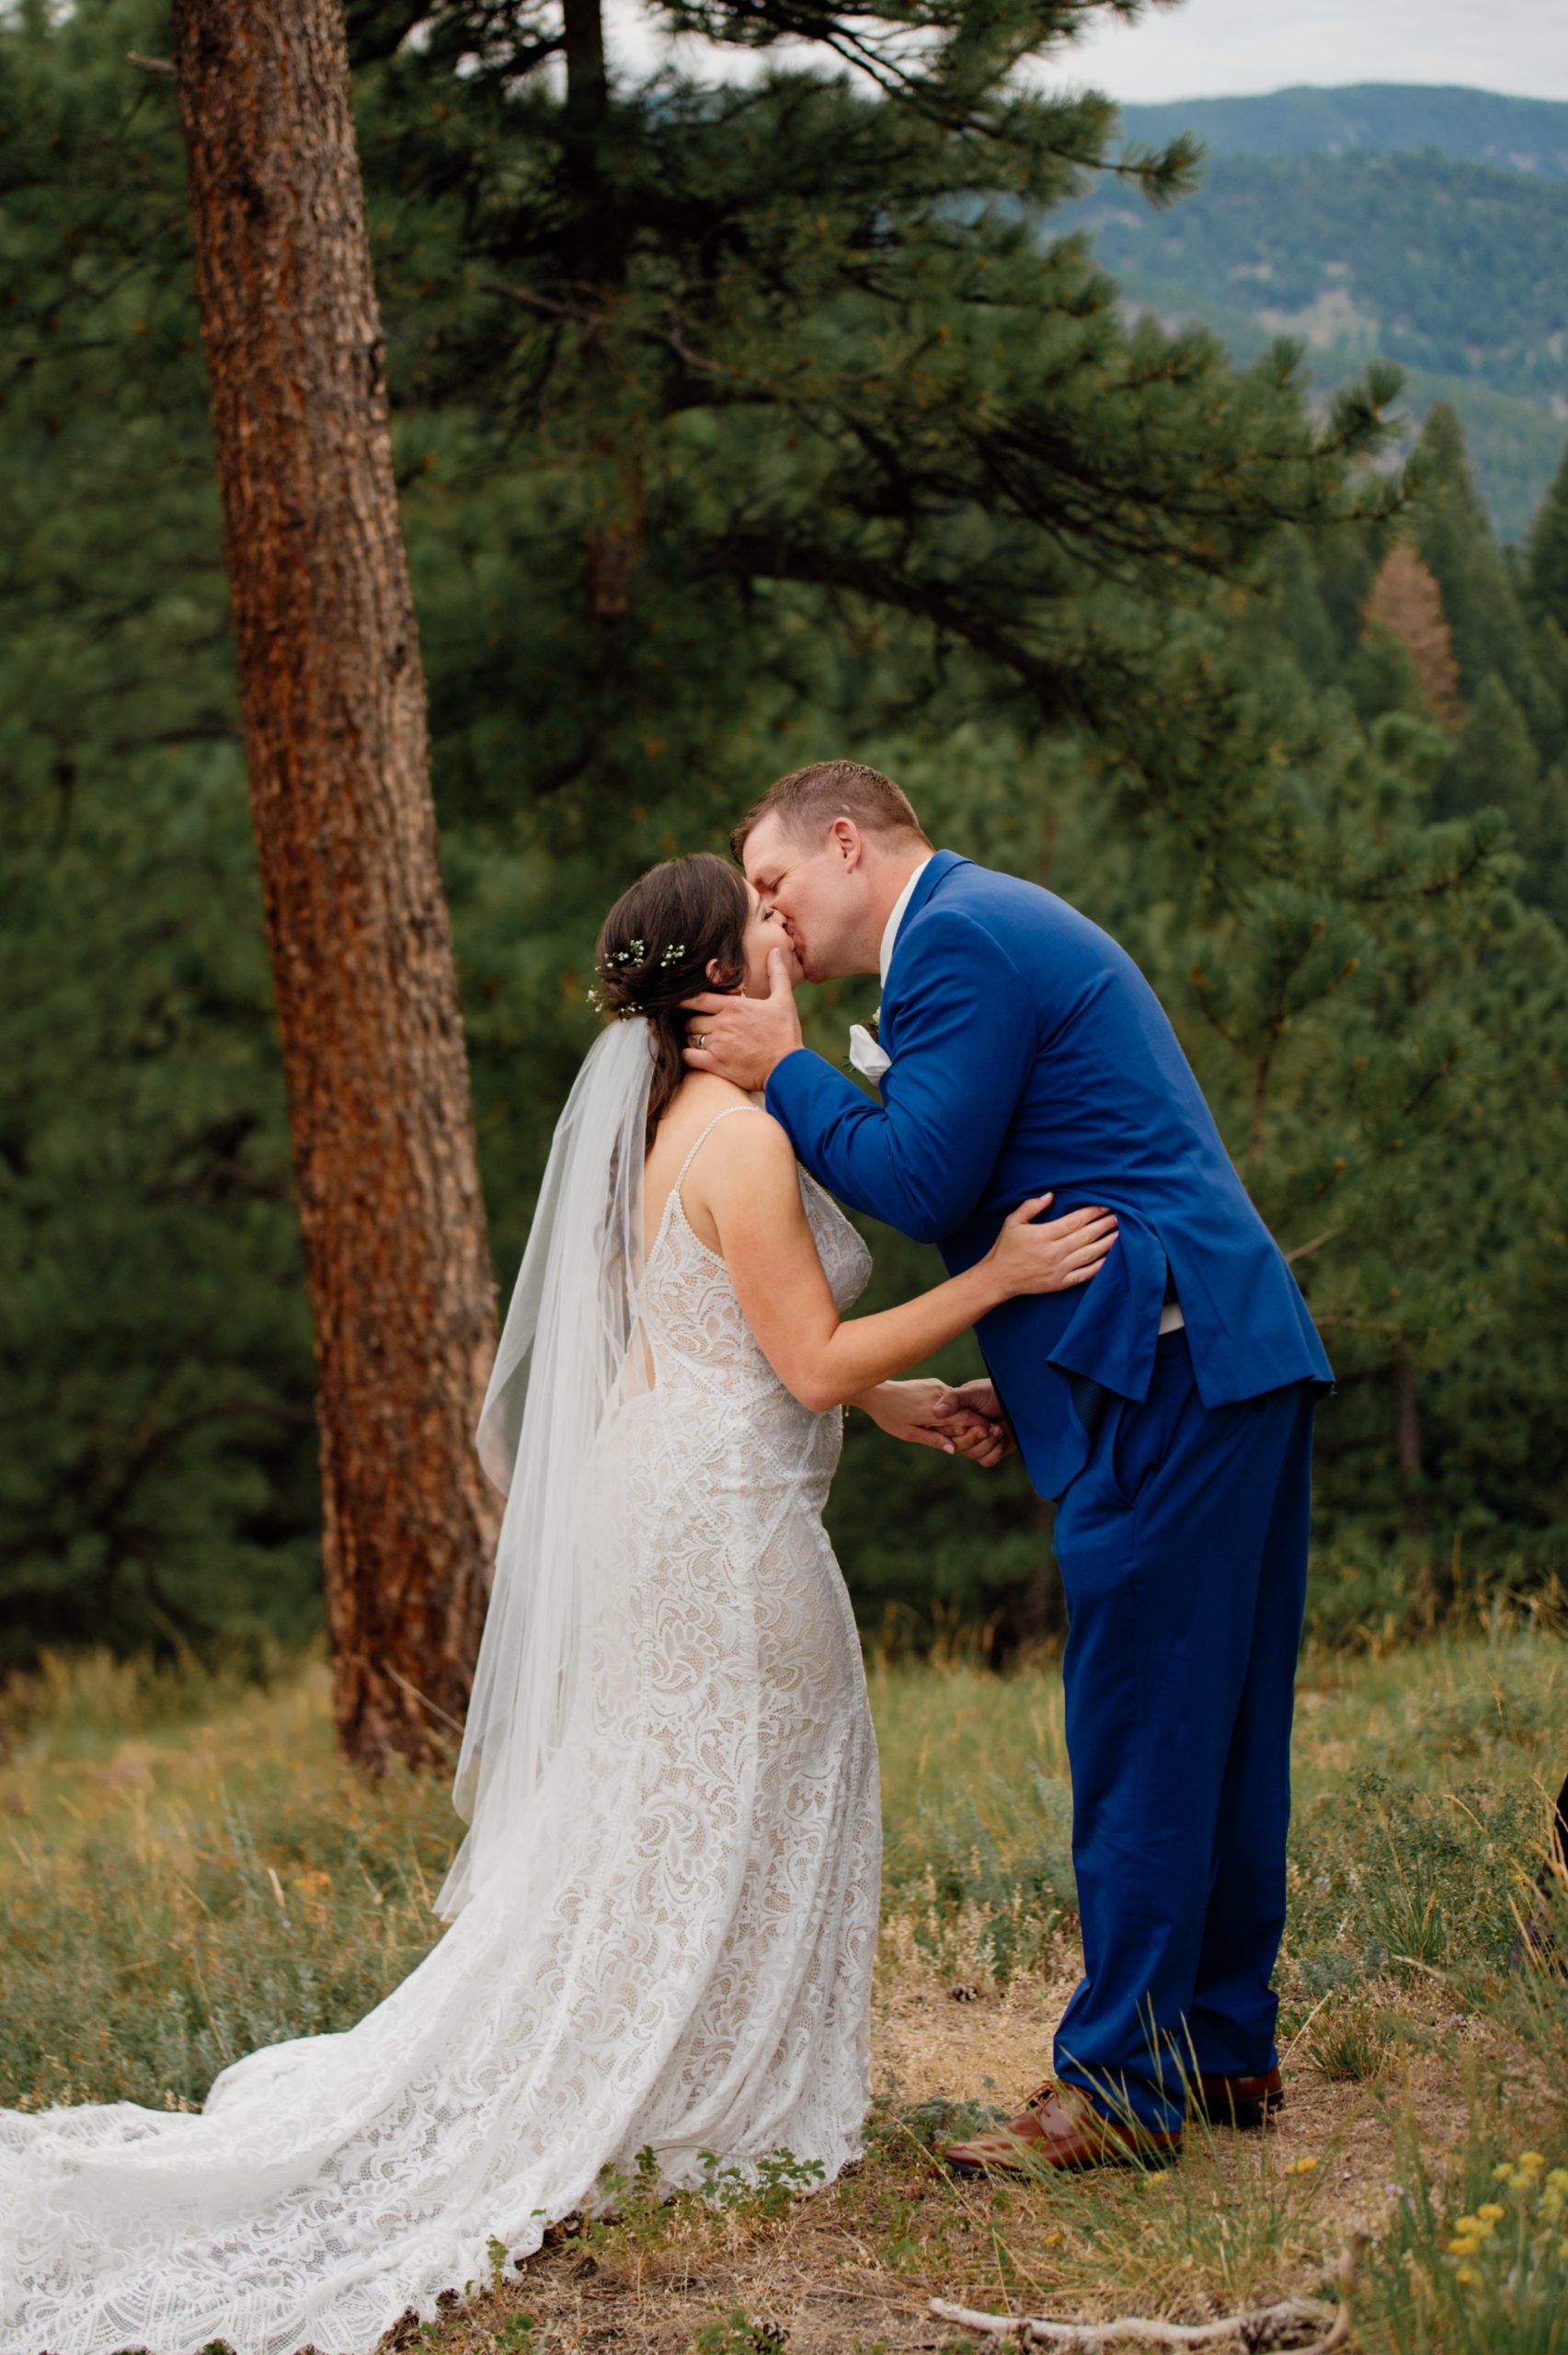 the bride and groom kiss for the first time as husband and wife during their elopement ceremony at Artist Point! 